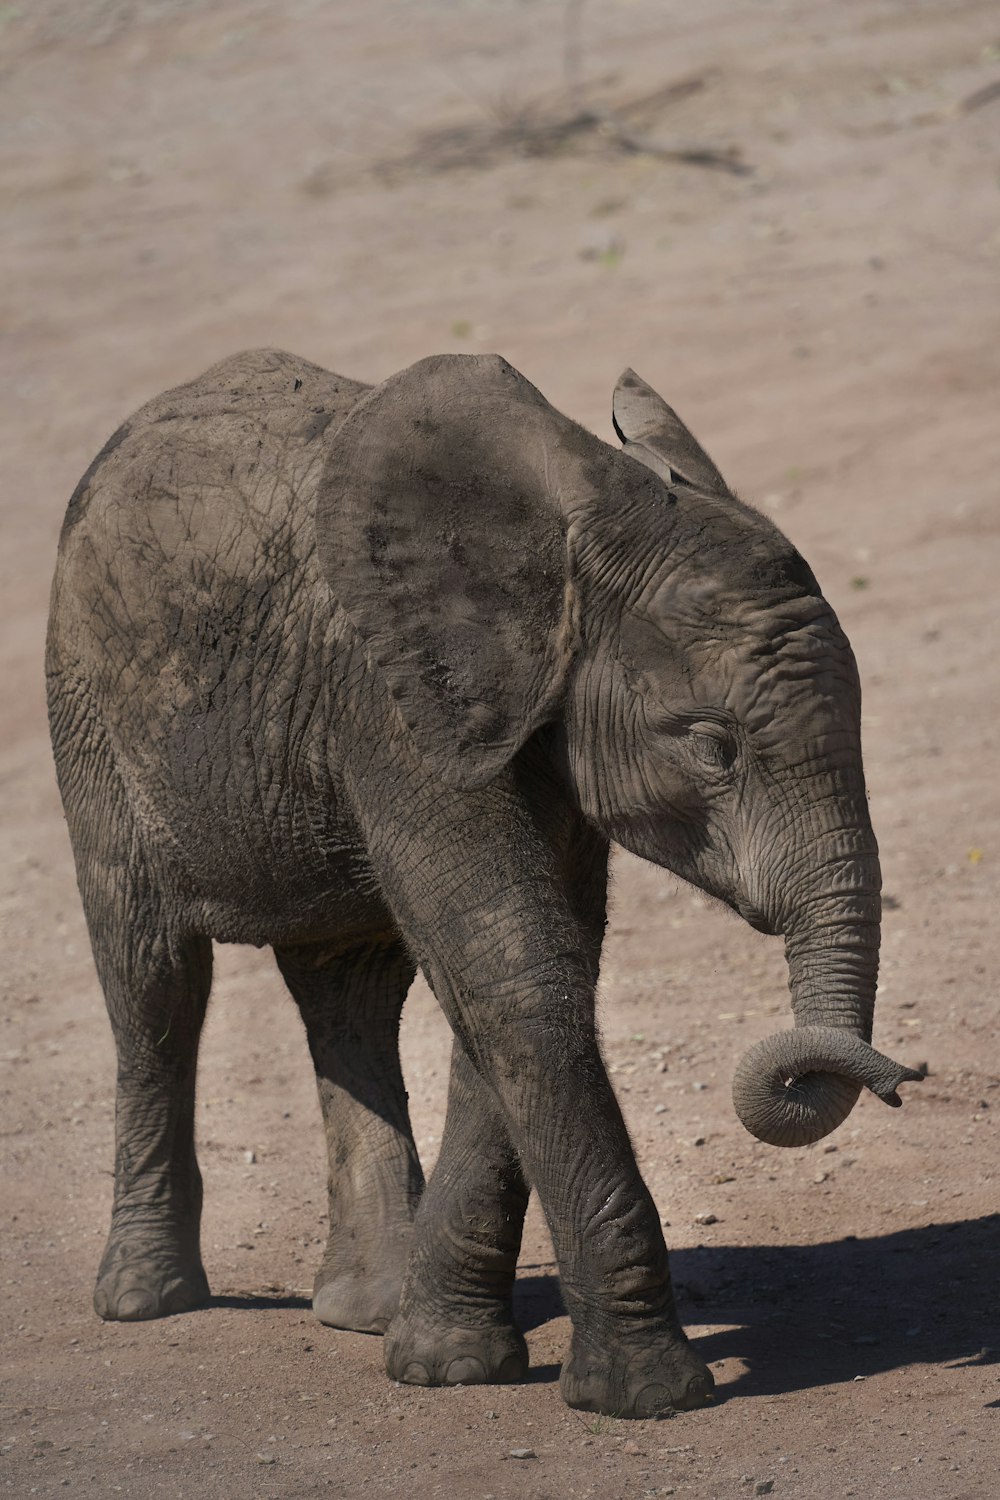 a baby elephant standing on top of a dirt field